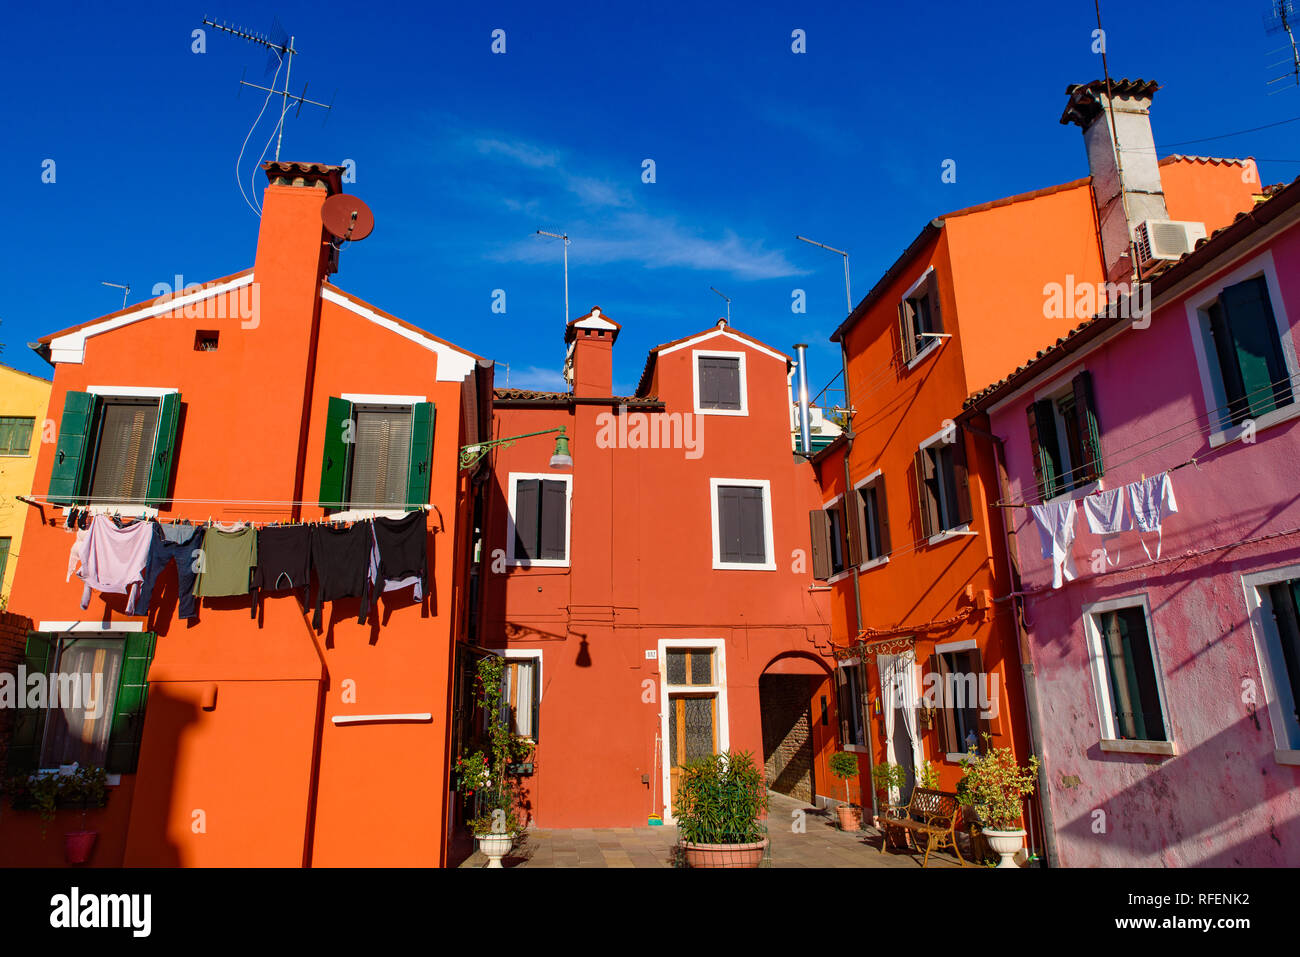 Burano island, famous for its colorful fishermen's houses, in Venice, Italy Stock Photo